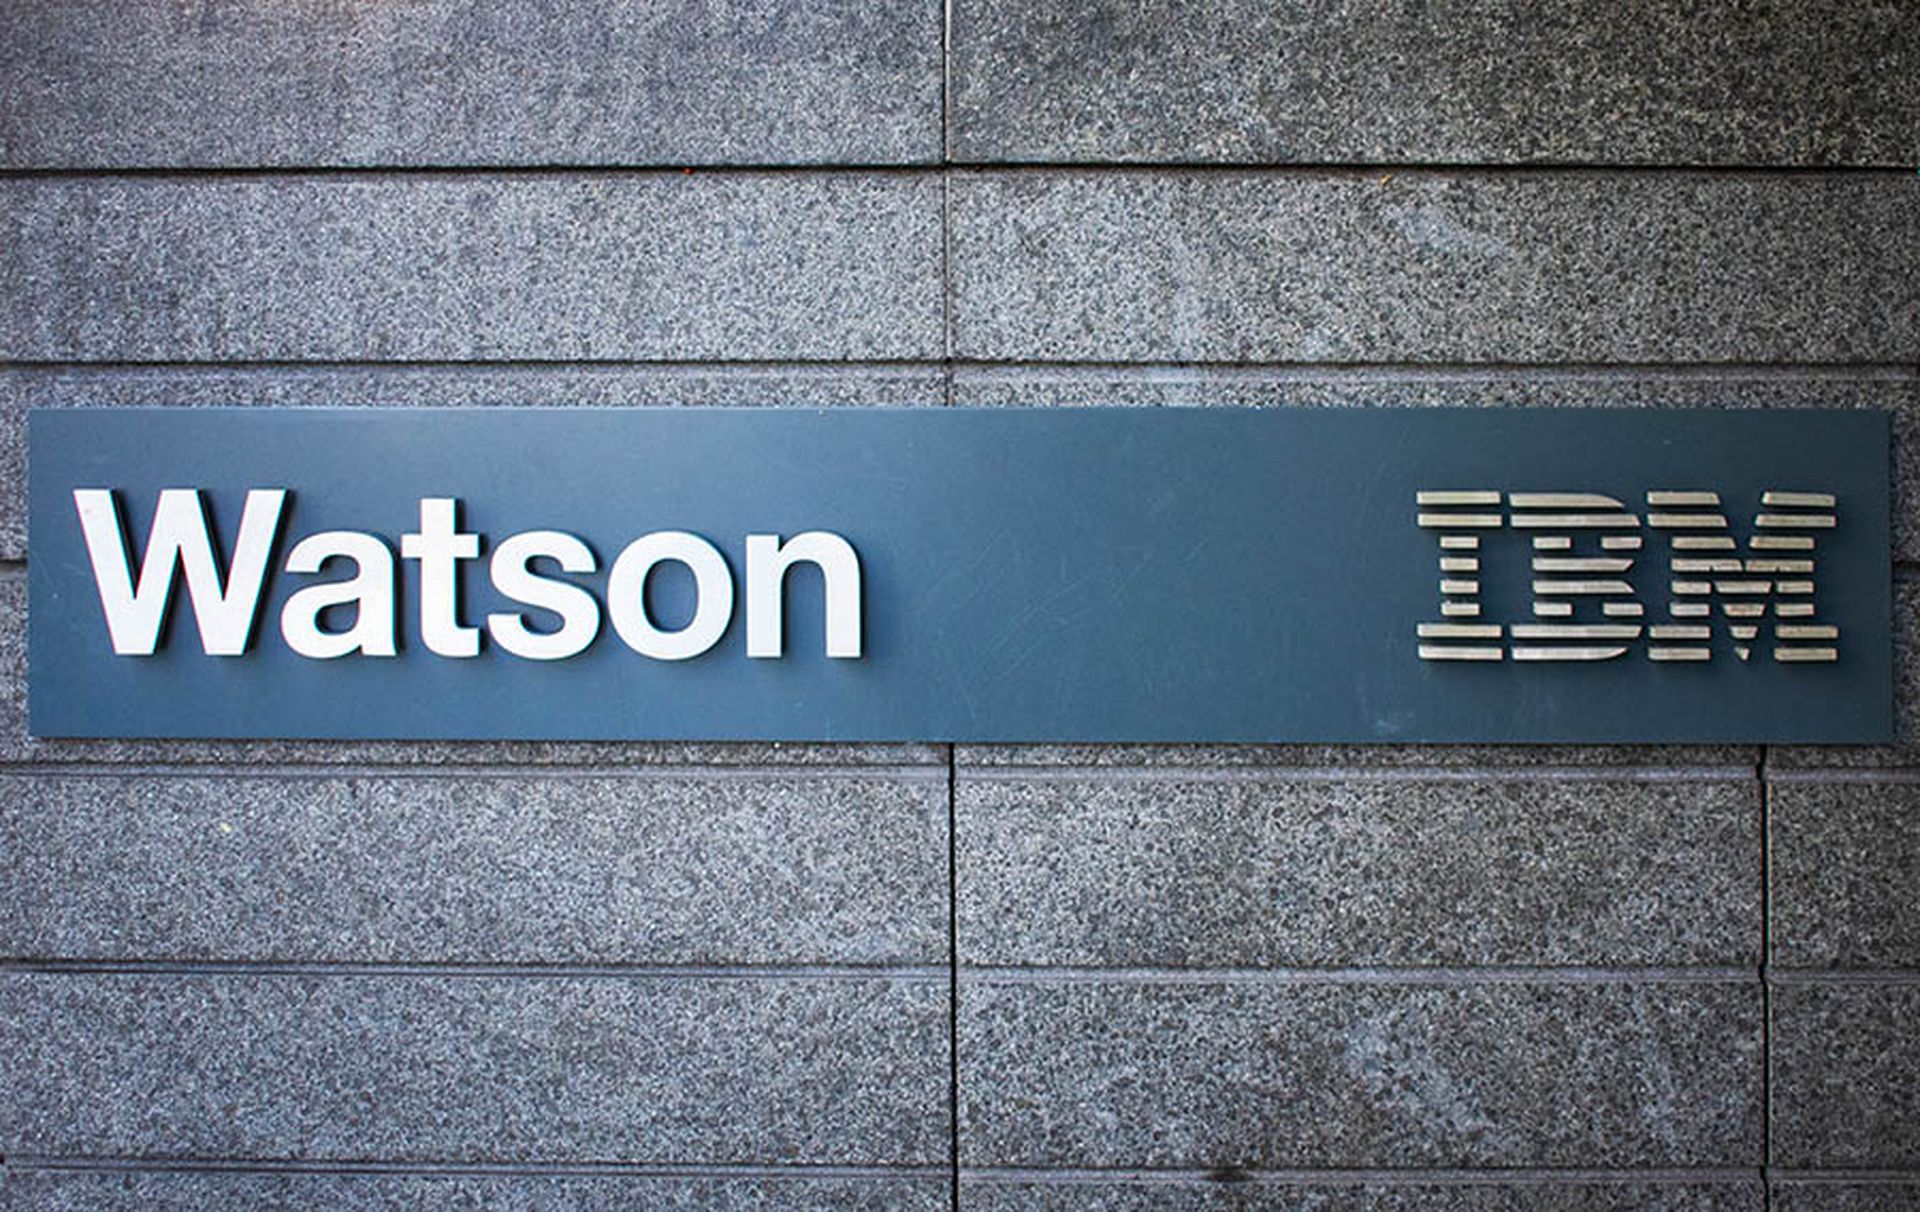 IBM’s Watson rebooted as a secure AI alternative